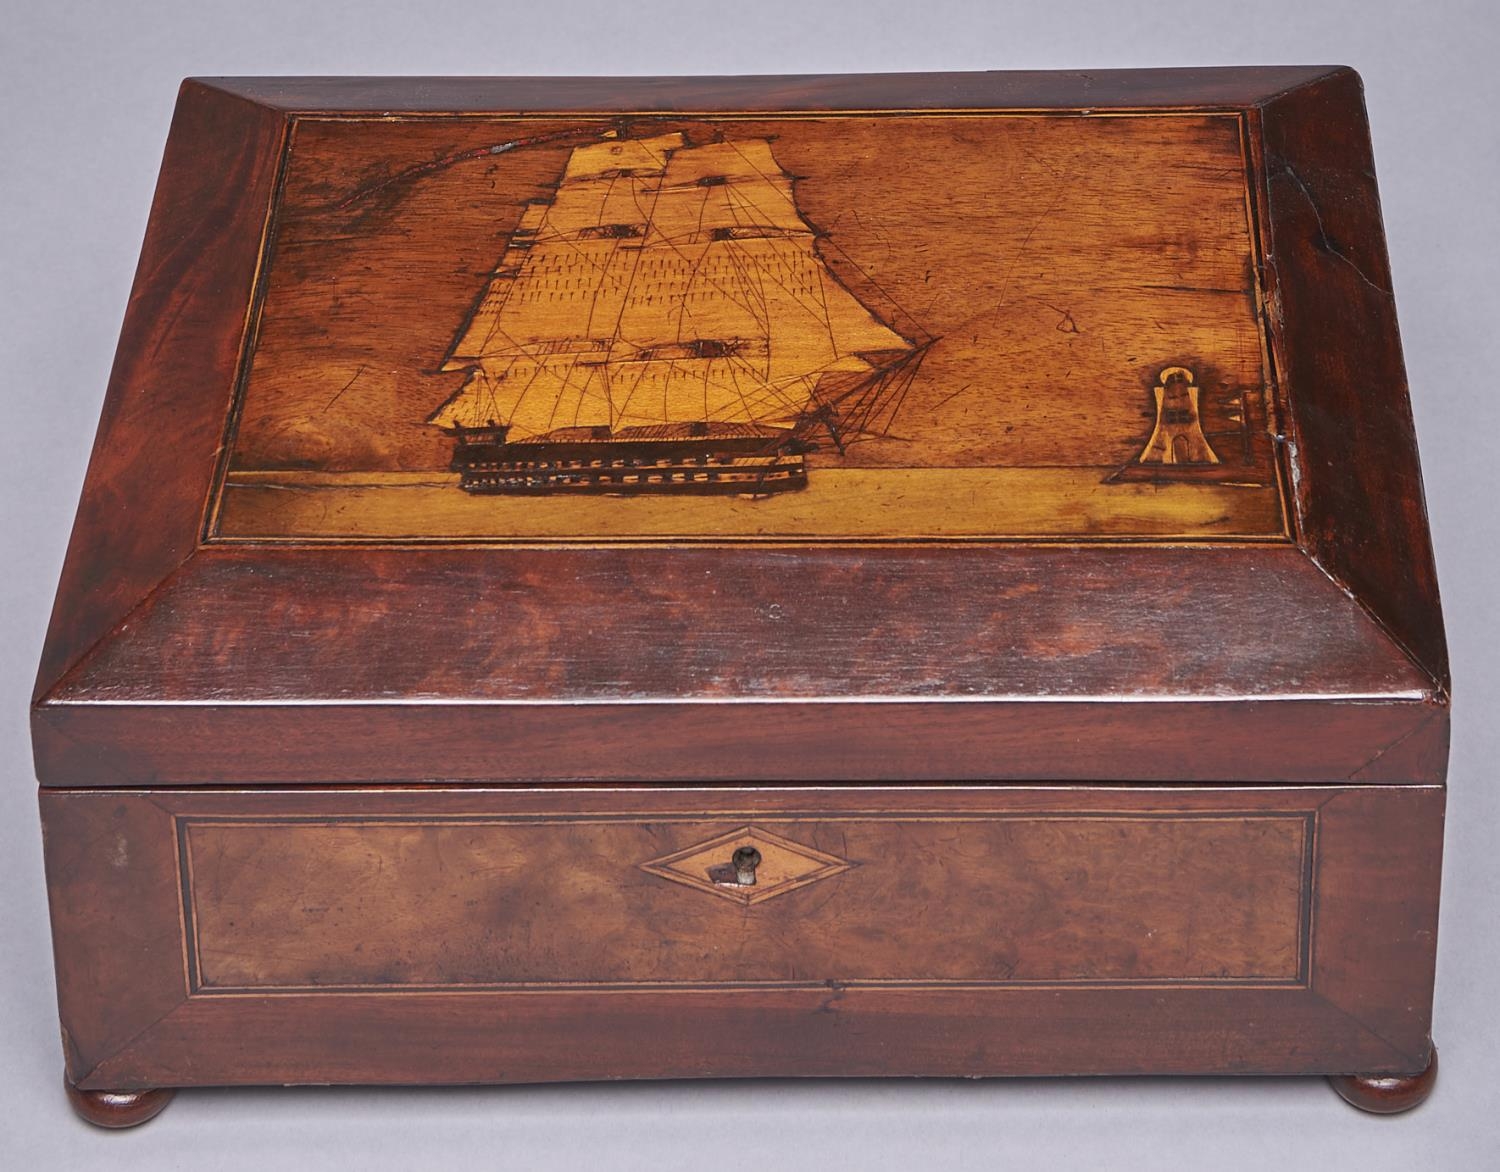 A sailor's mahogany, walnut, inlaid and penwork decorated workbox, late 19th c, the lid with a